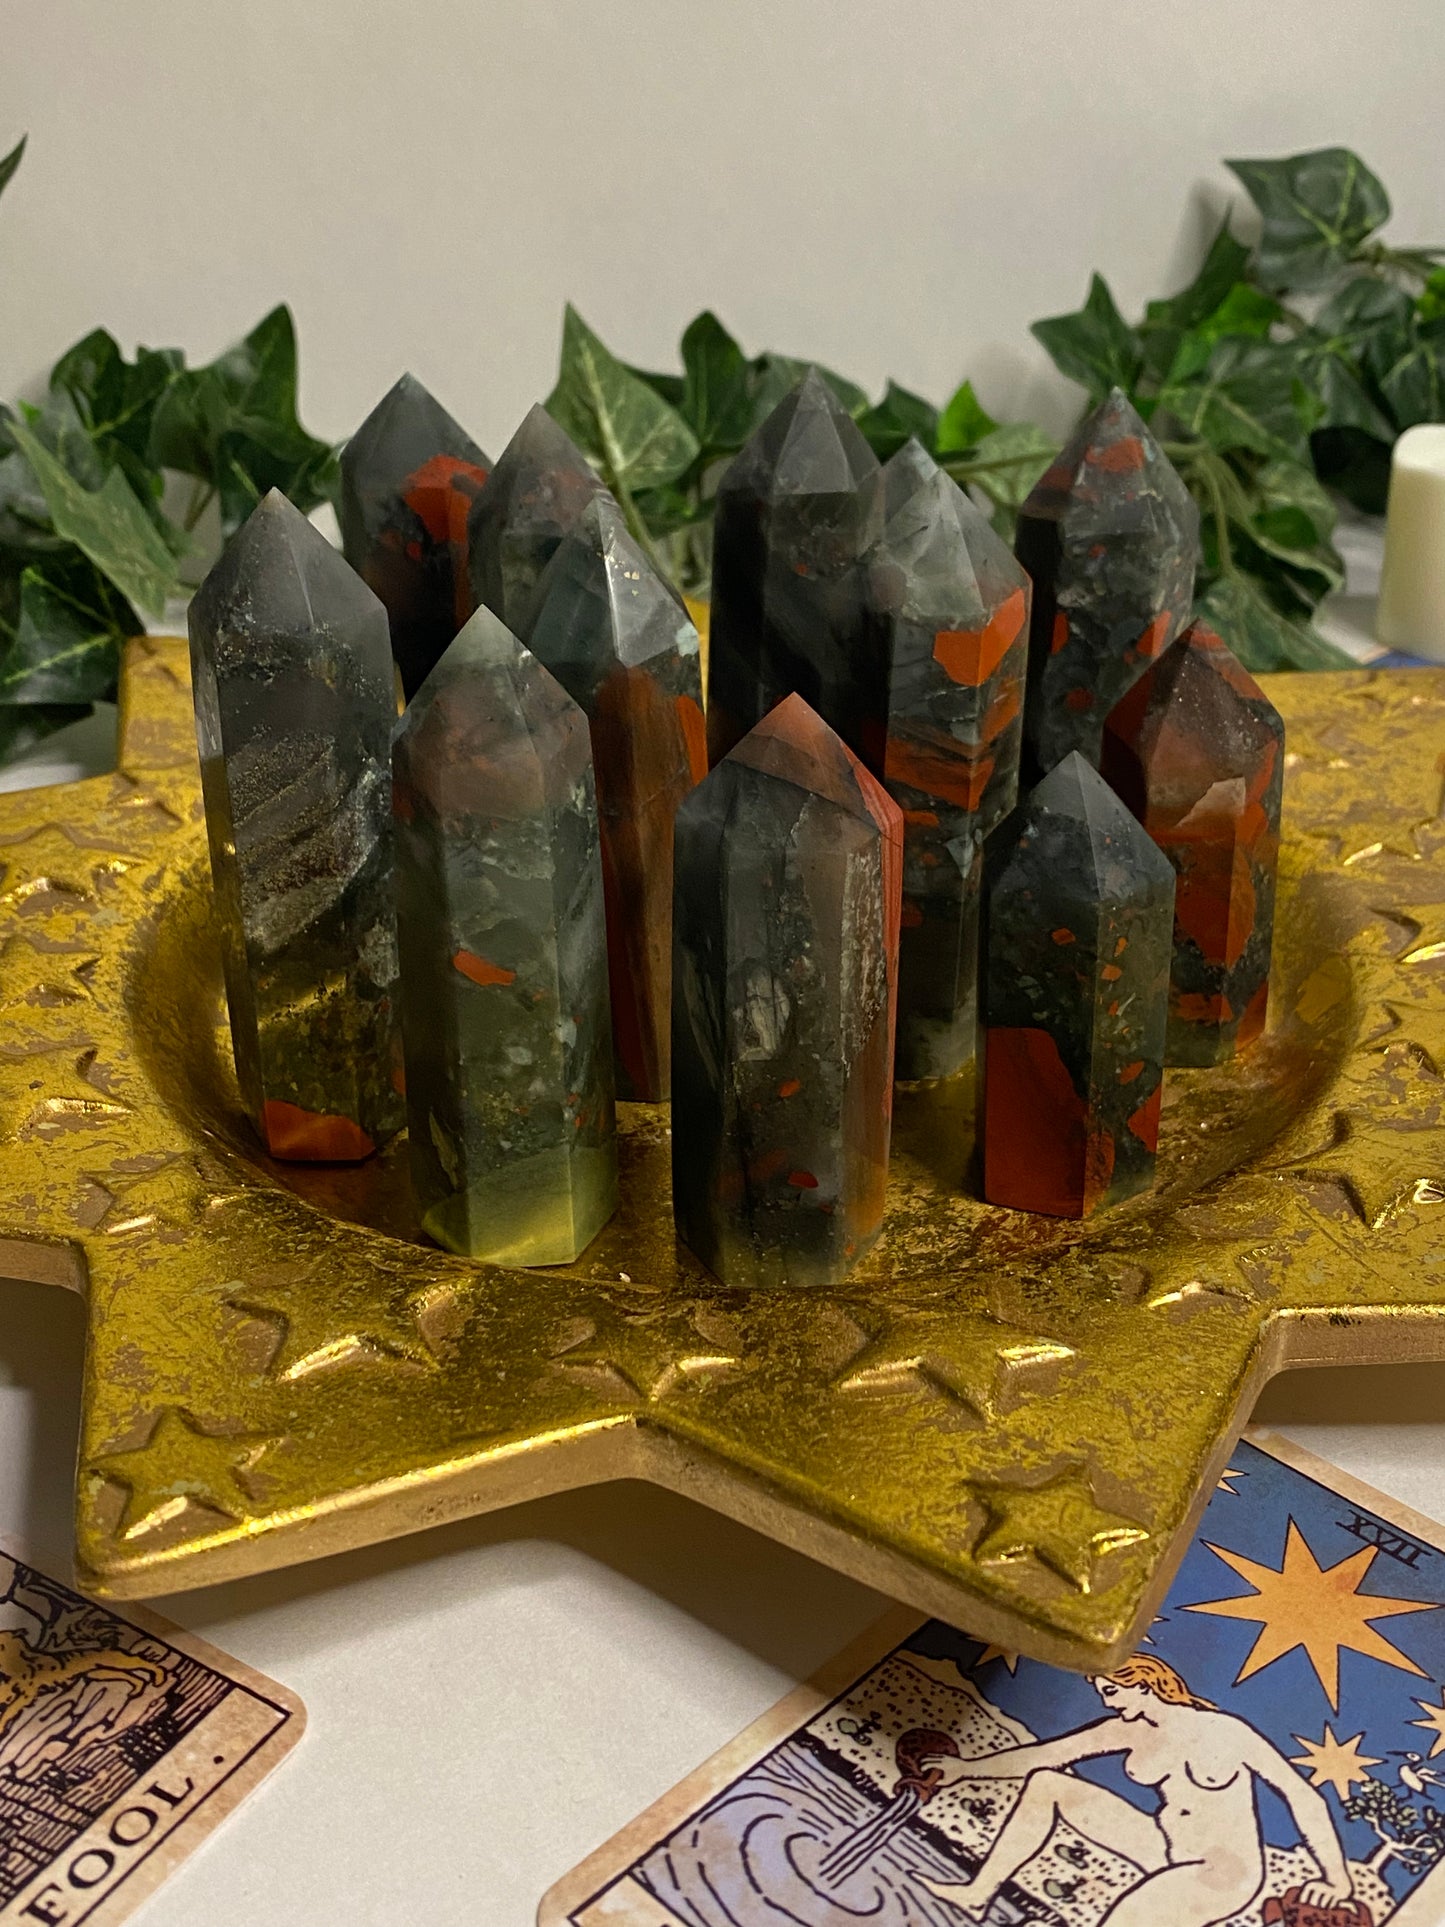 Bloodstone with Pyrite Inclusions Towers